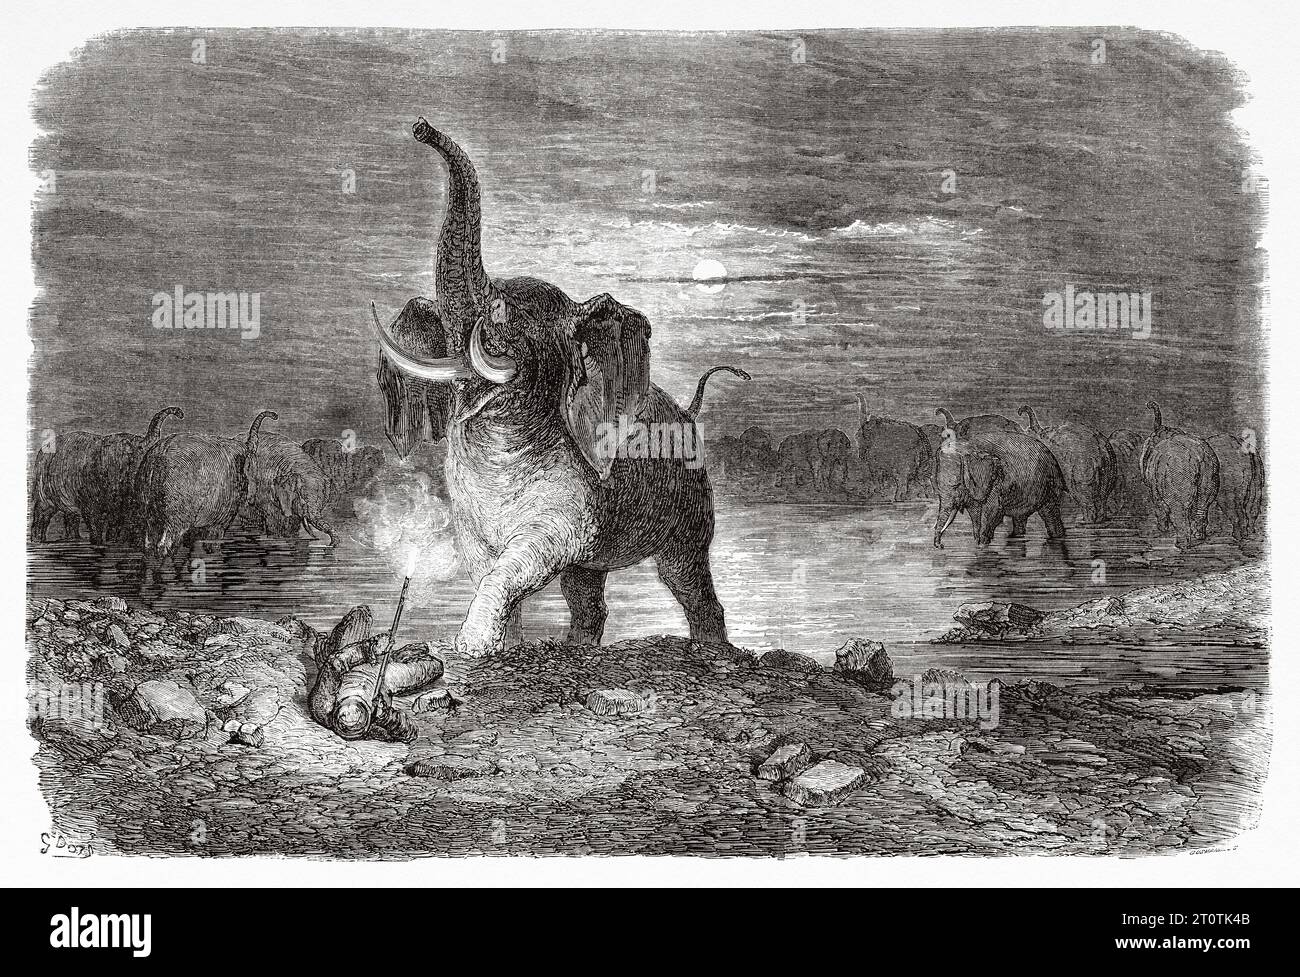 Hunter surprised by an elephant, Africa. Adventures and Hunts of the Traveler Charles John Andersson in Southern Africa from 1850 to 1860. Old 19th century illustration by Gustave Doré (1832 - 1883) from Le Tour du Monde 1860 Stock Photo